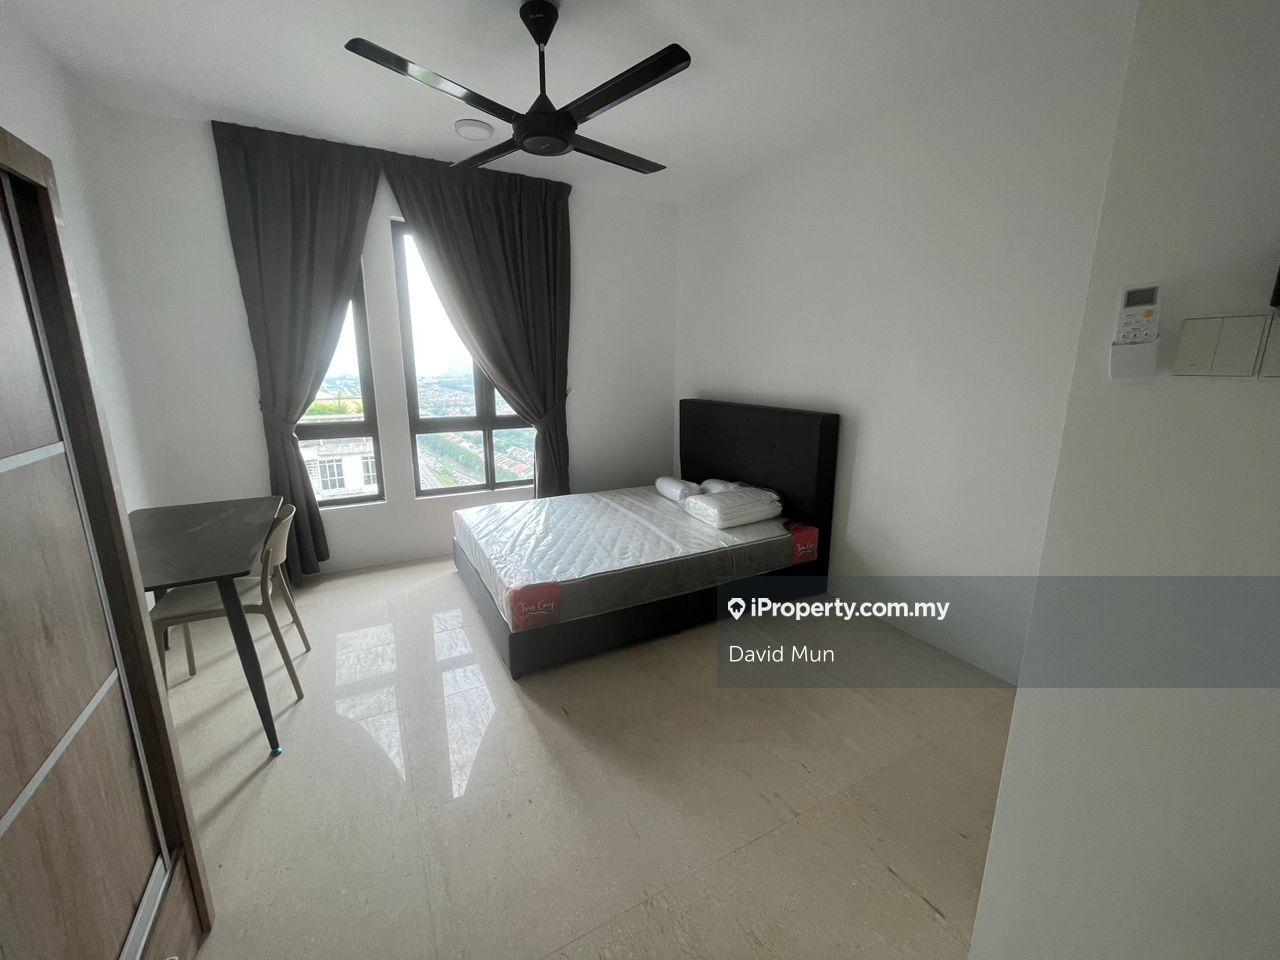 Kenwingston Skylofts Serviced Residence 1 bedroom for rent in Subang ...